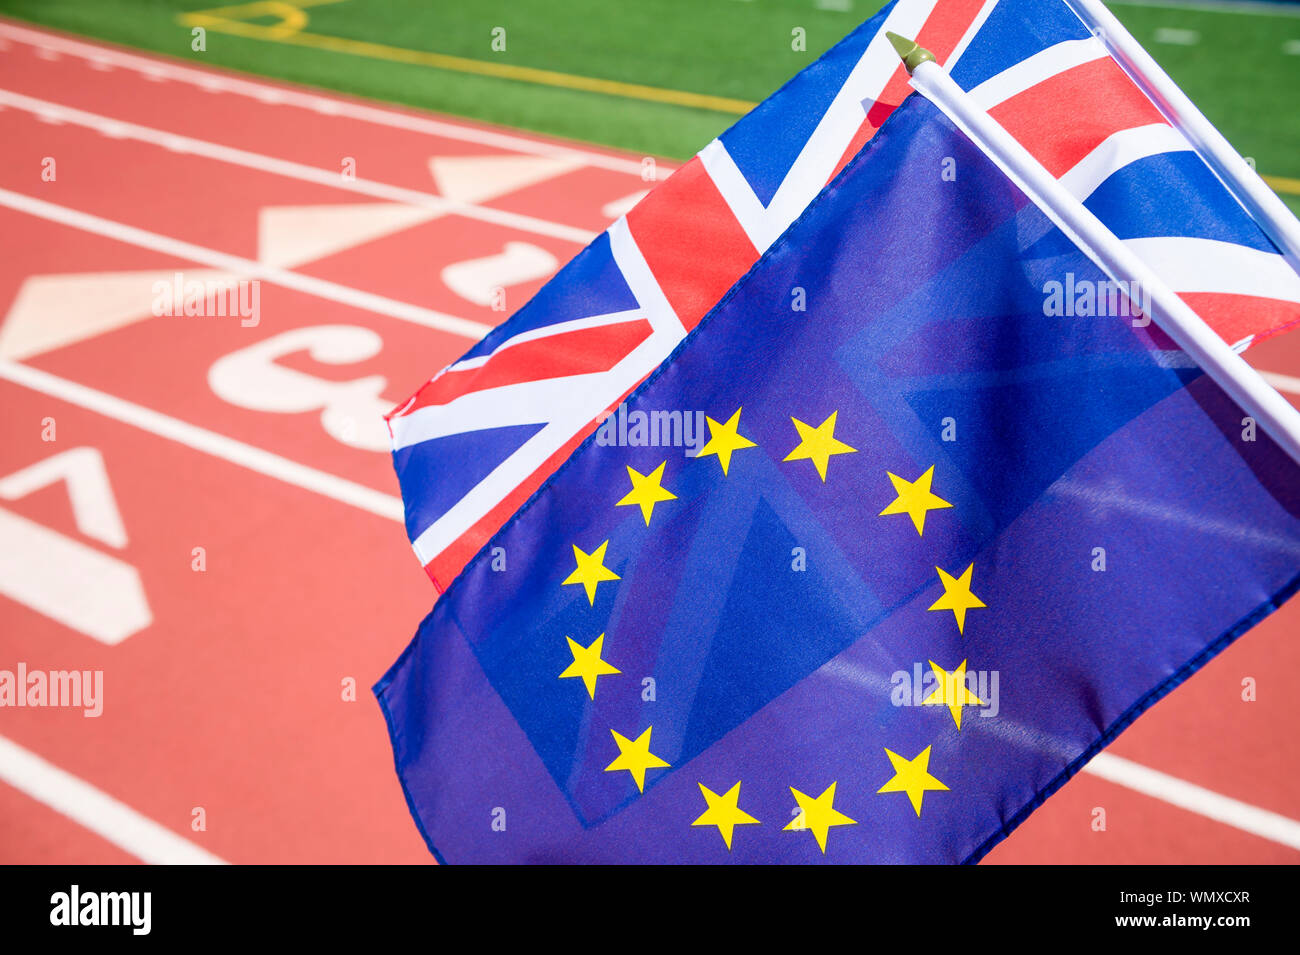 Union Jack and European Union flags flying together at a running track in the Brexit race for the UK to leave the EU Stock Photo